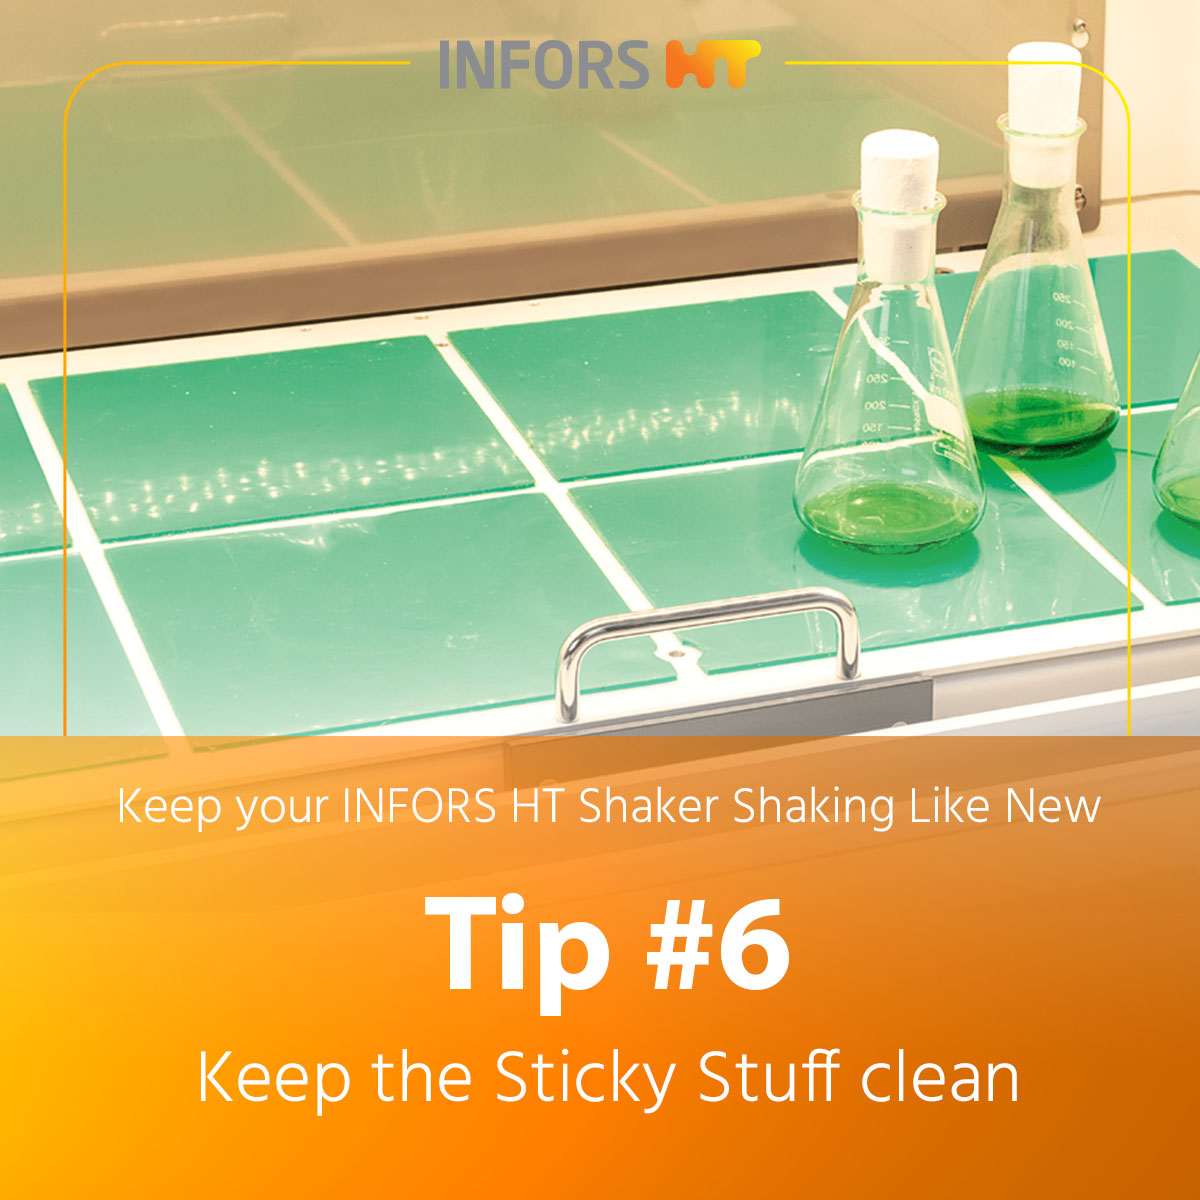 Service Tip 6 Keep the Sticky Stuff clean